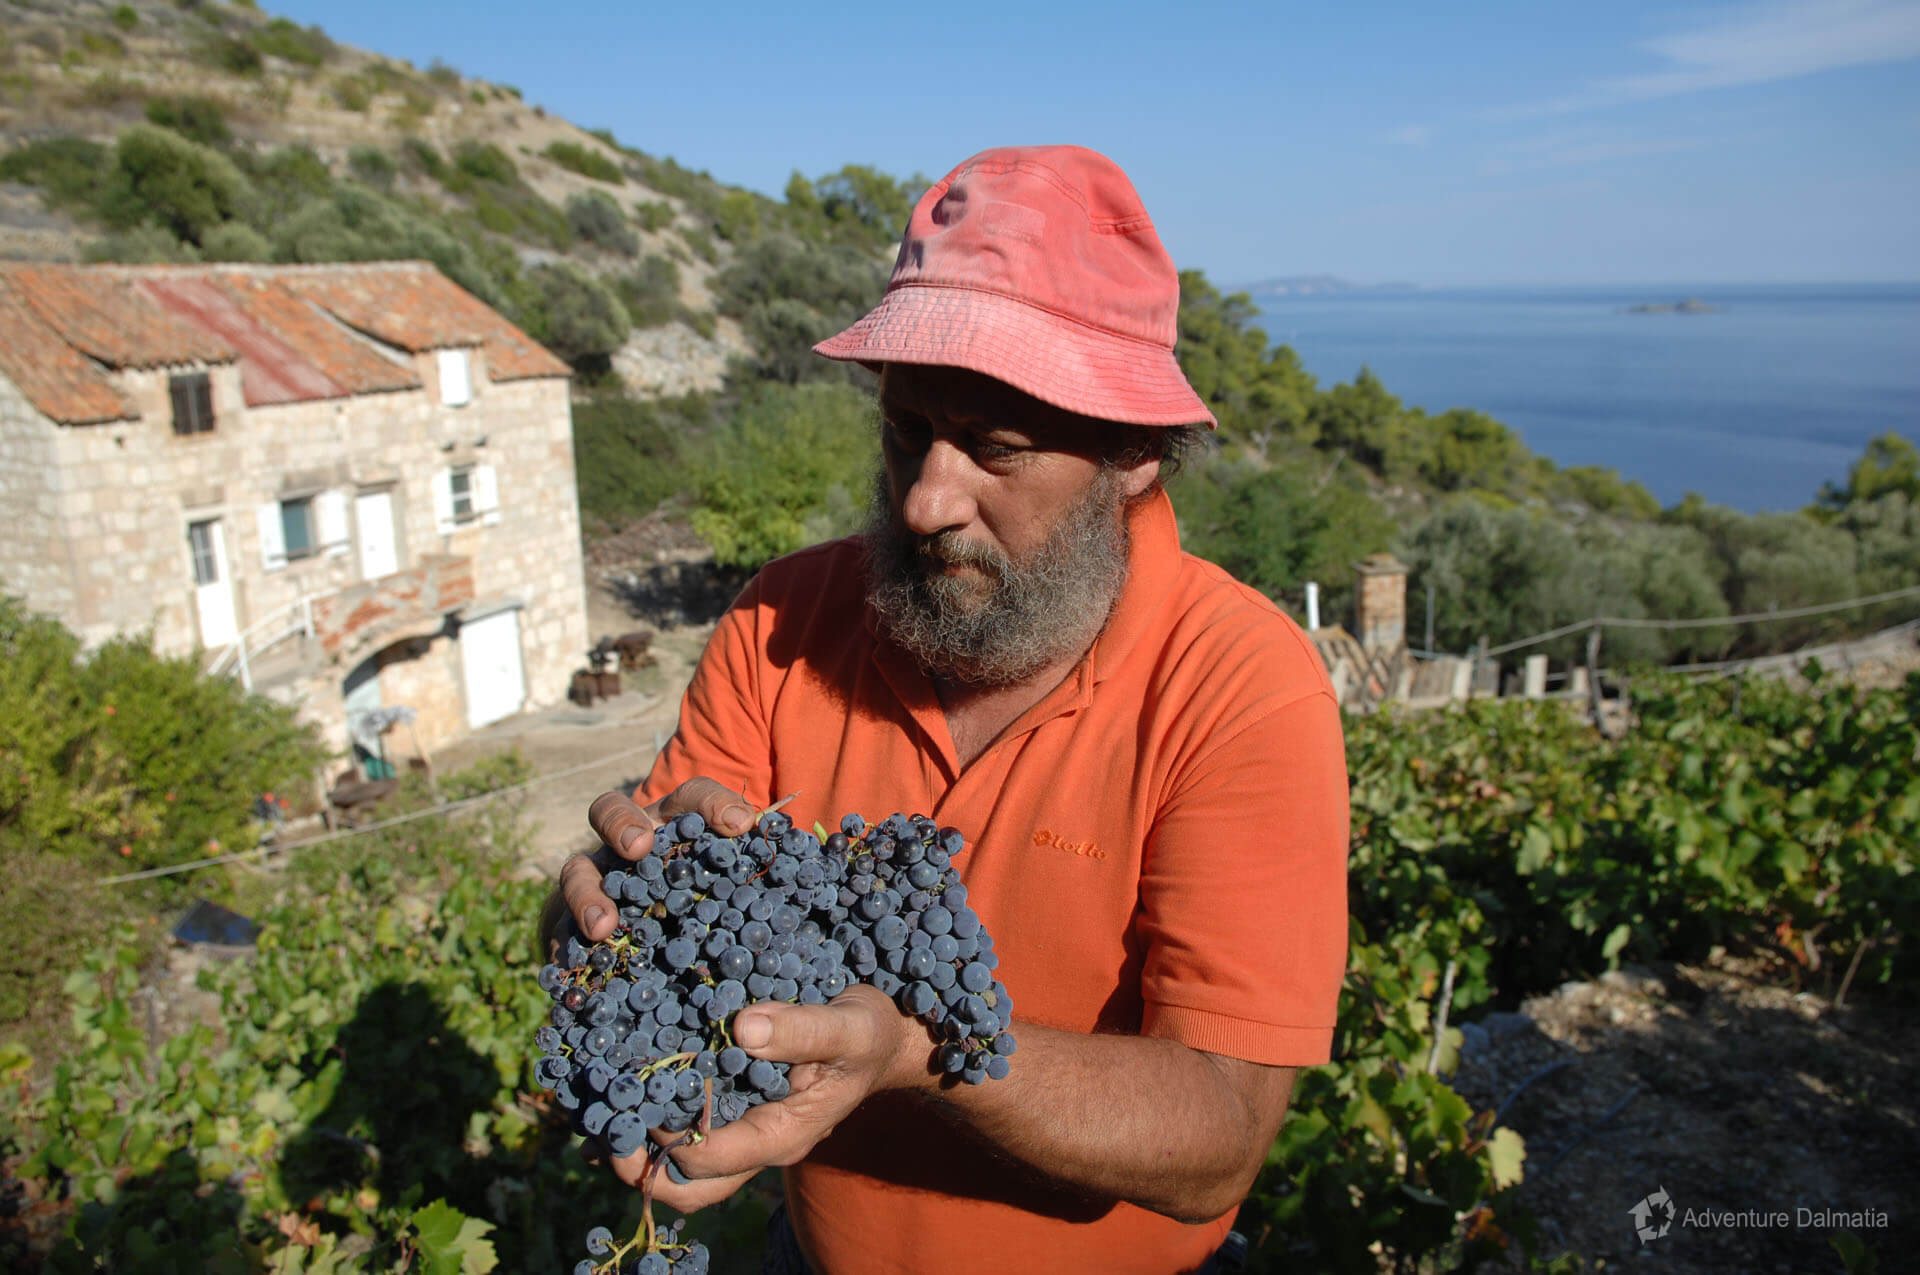 Famous red wines are made at the heart of the Adriatic sea, Svetac island.